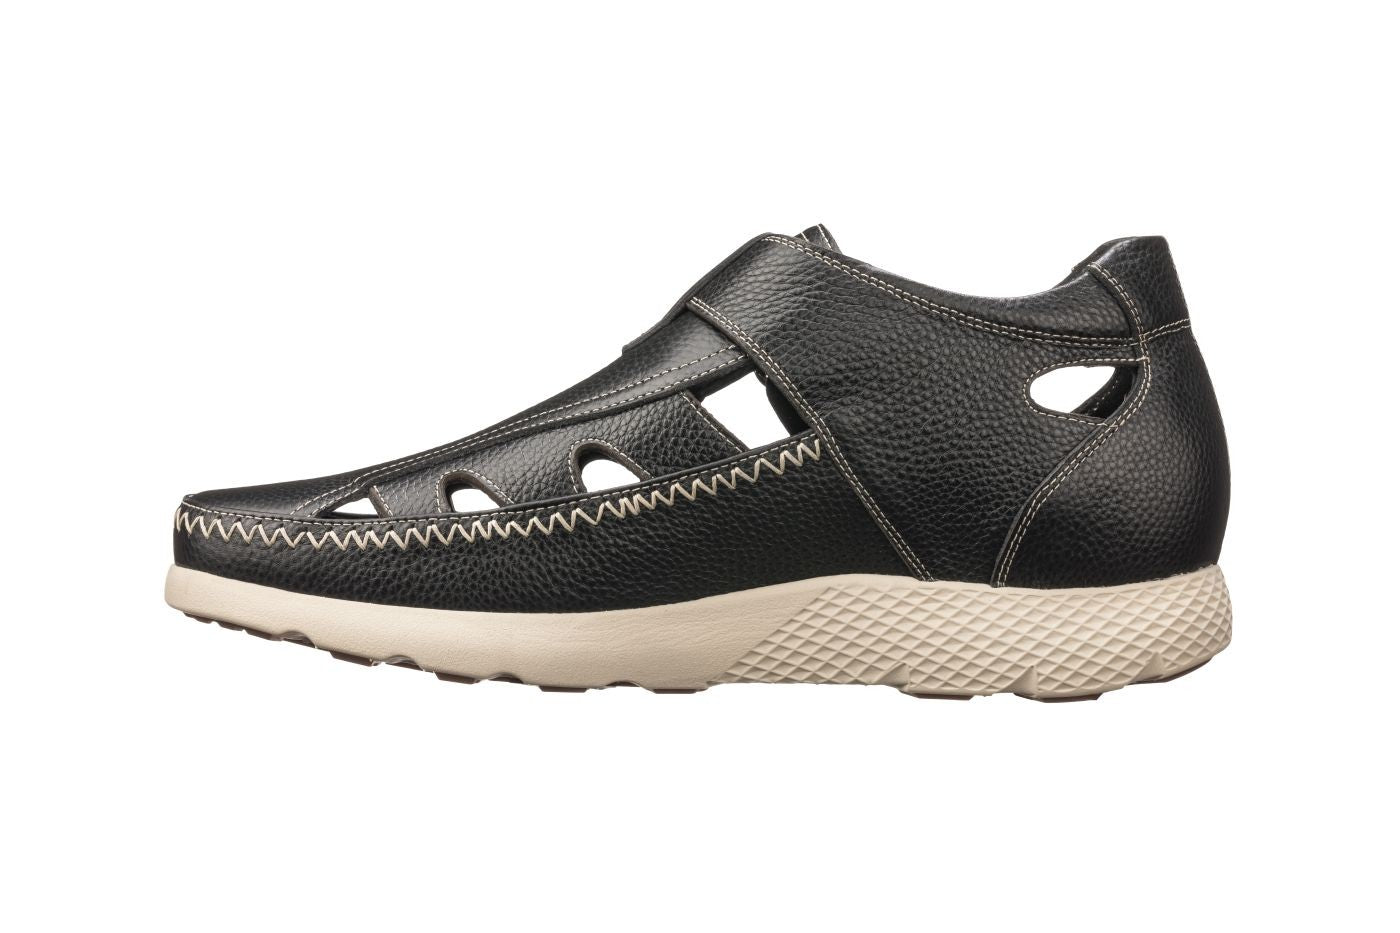 Elevator shoes height increase CALTO - K2132 - 2.8 Inches Taller (Black) - Fisherman Sandal Lightweight